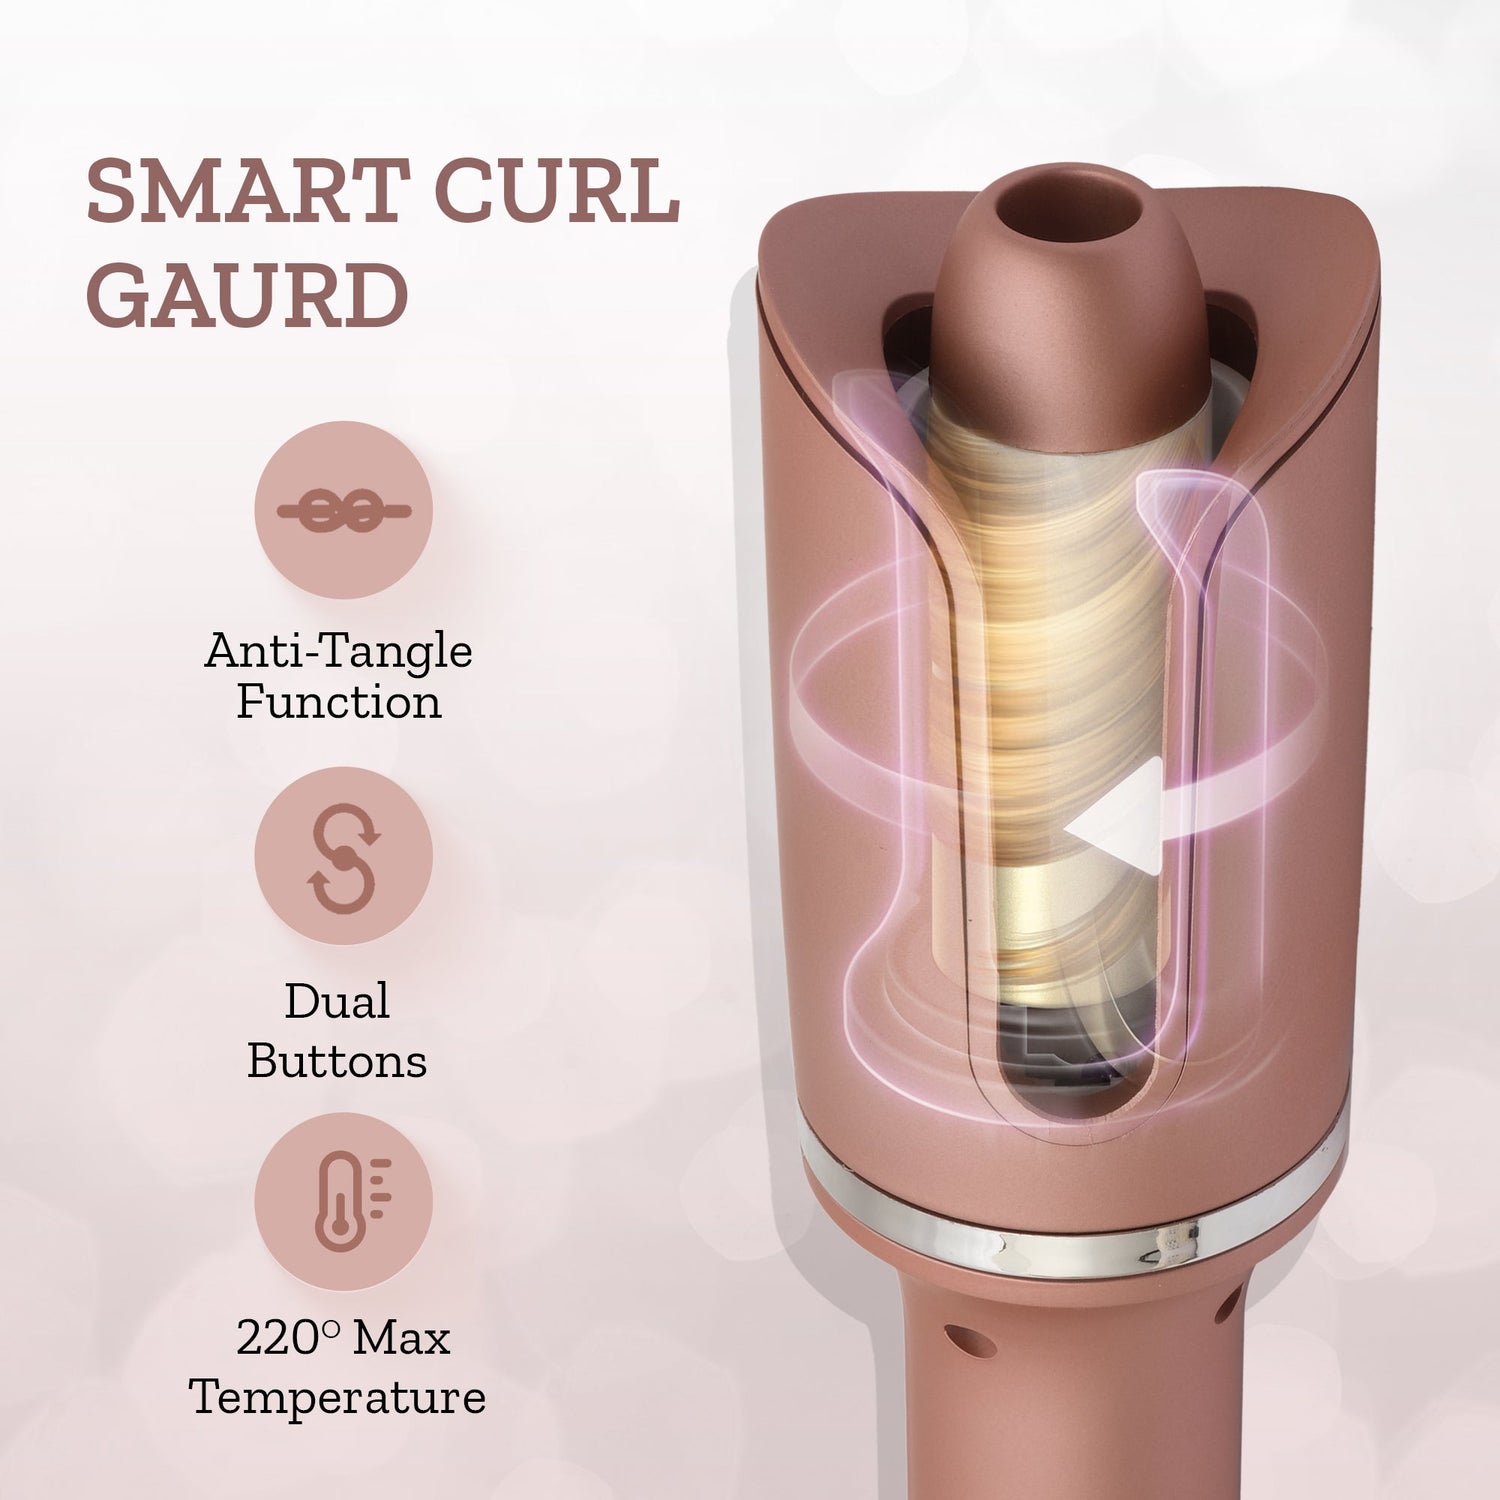 Couture Hair Pro Automatic Hair Curler - Rose Gold - Couture Hair Pro